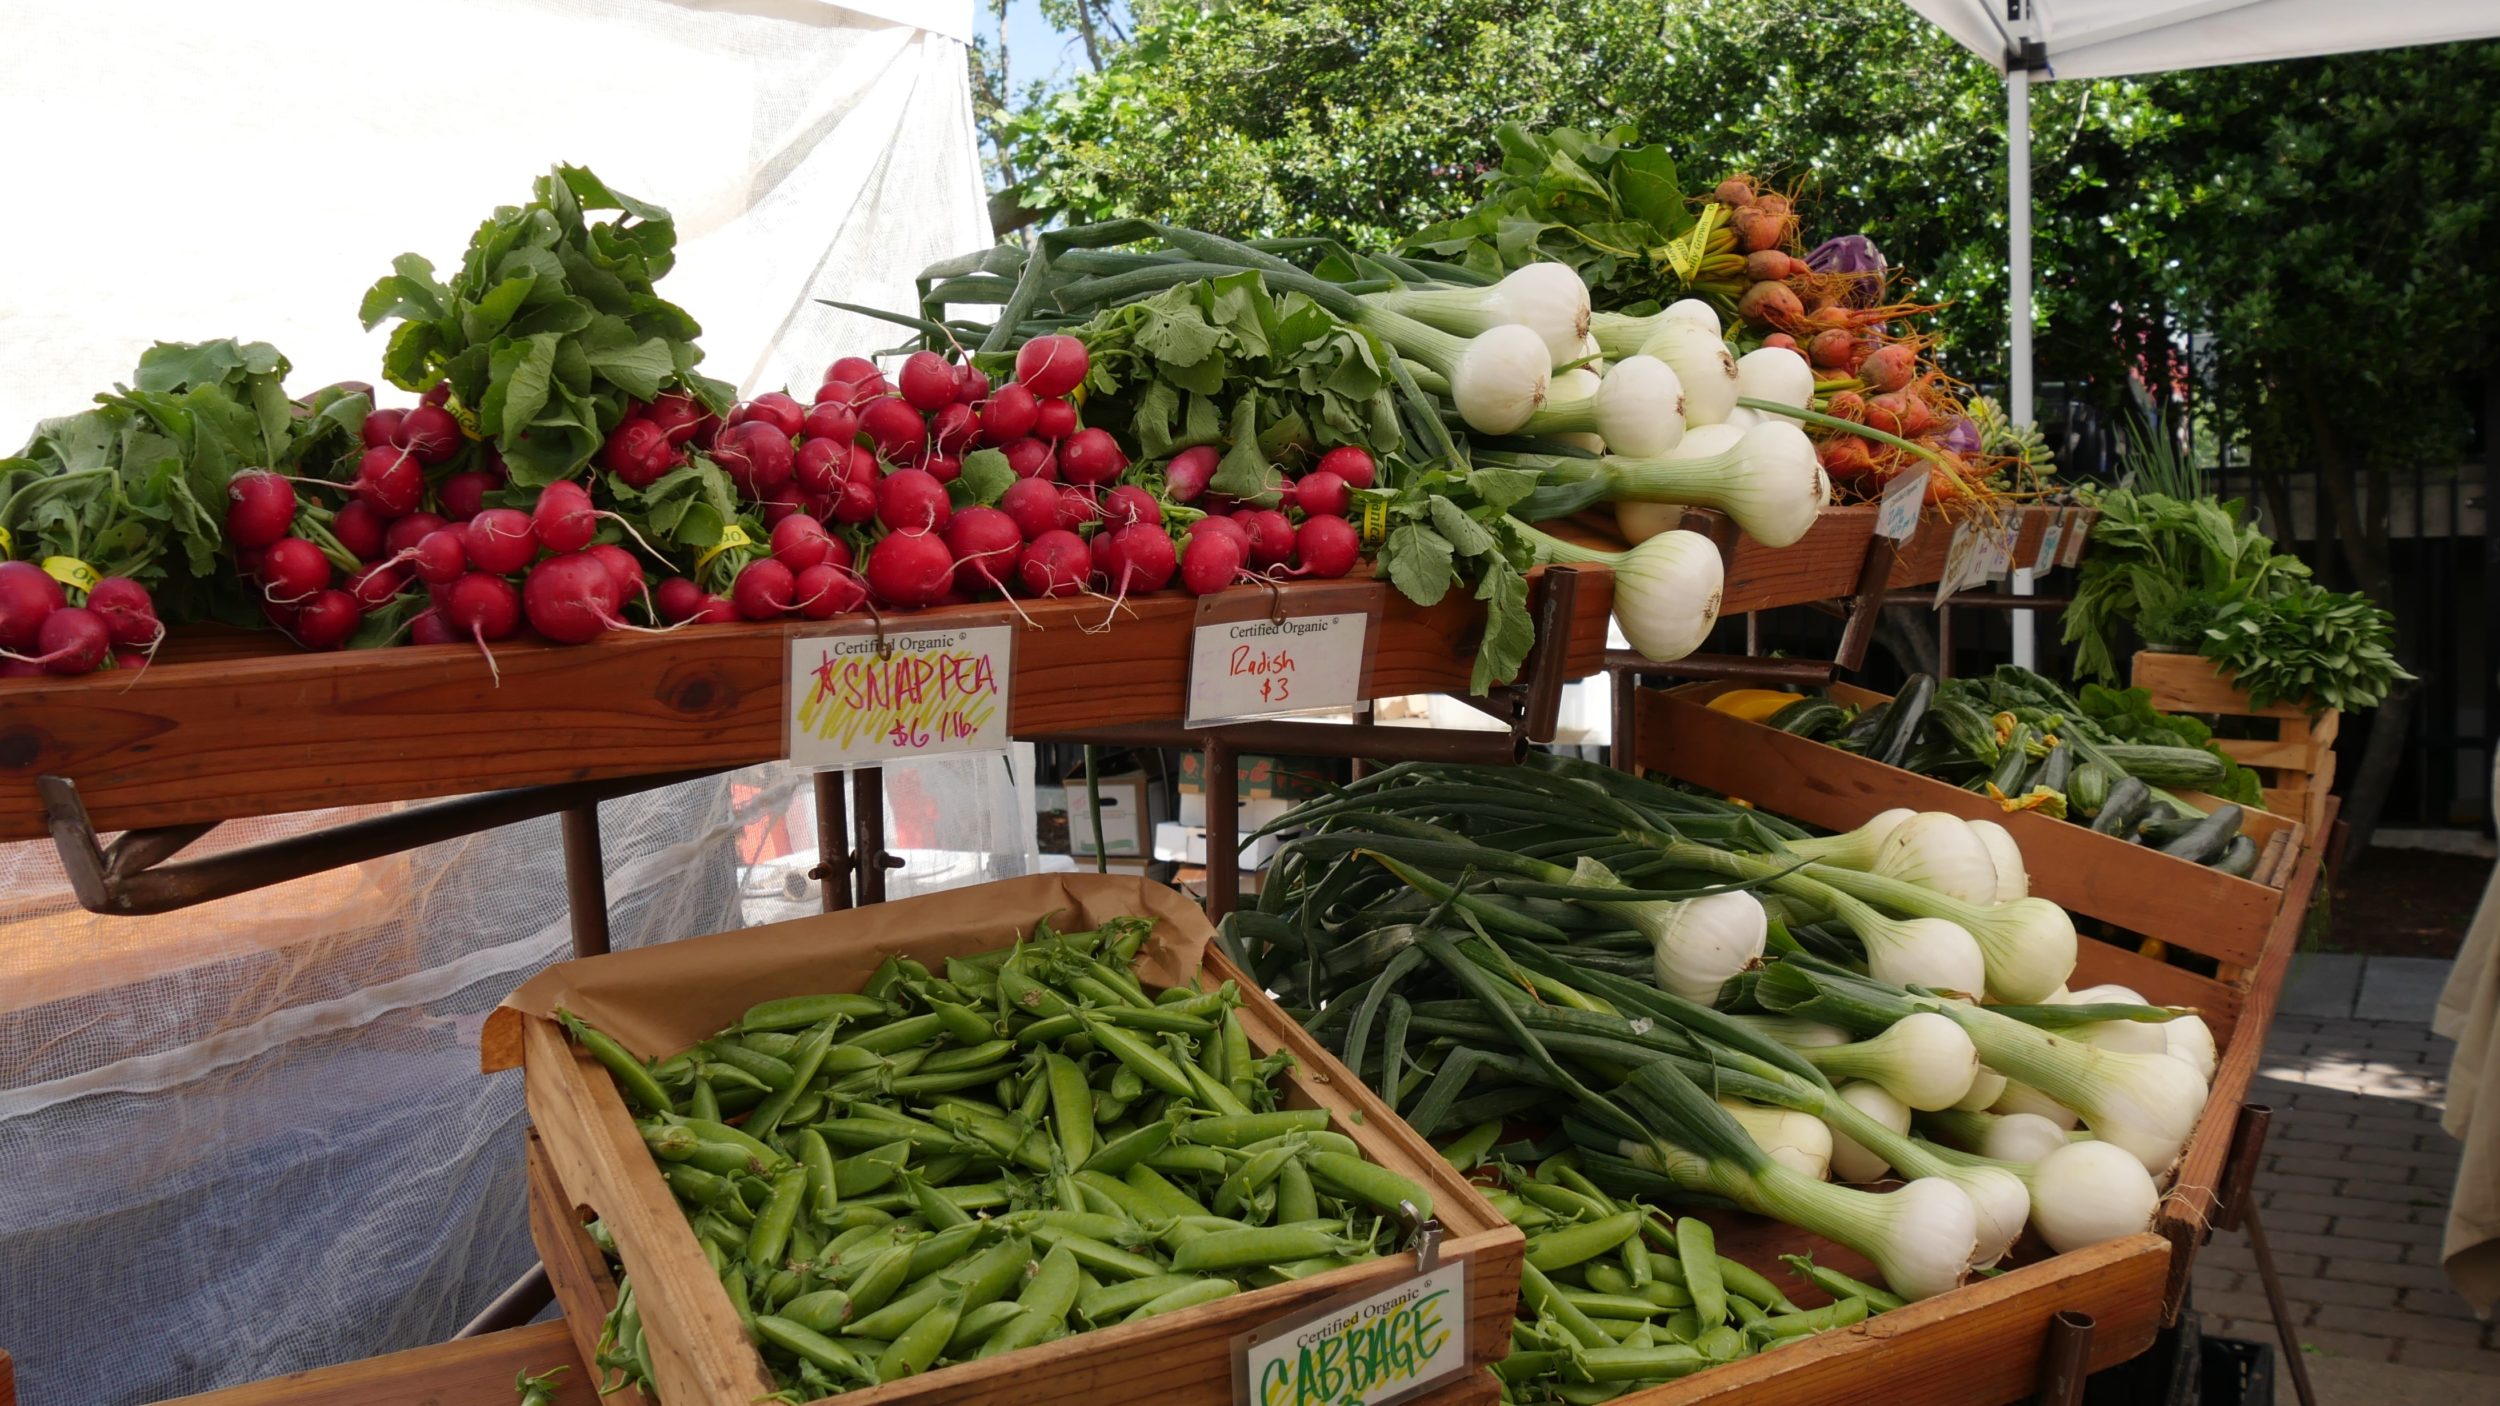 5 tips for shopping smarter at local farmer’s markets in Orange County